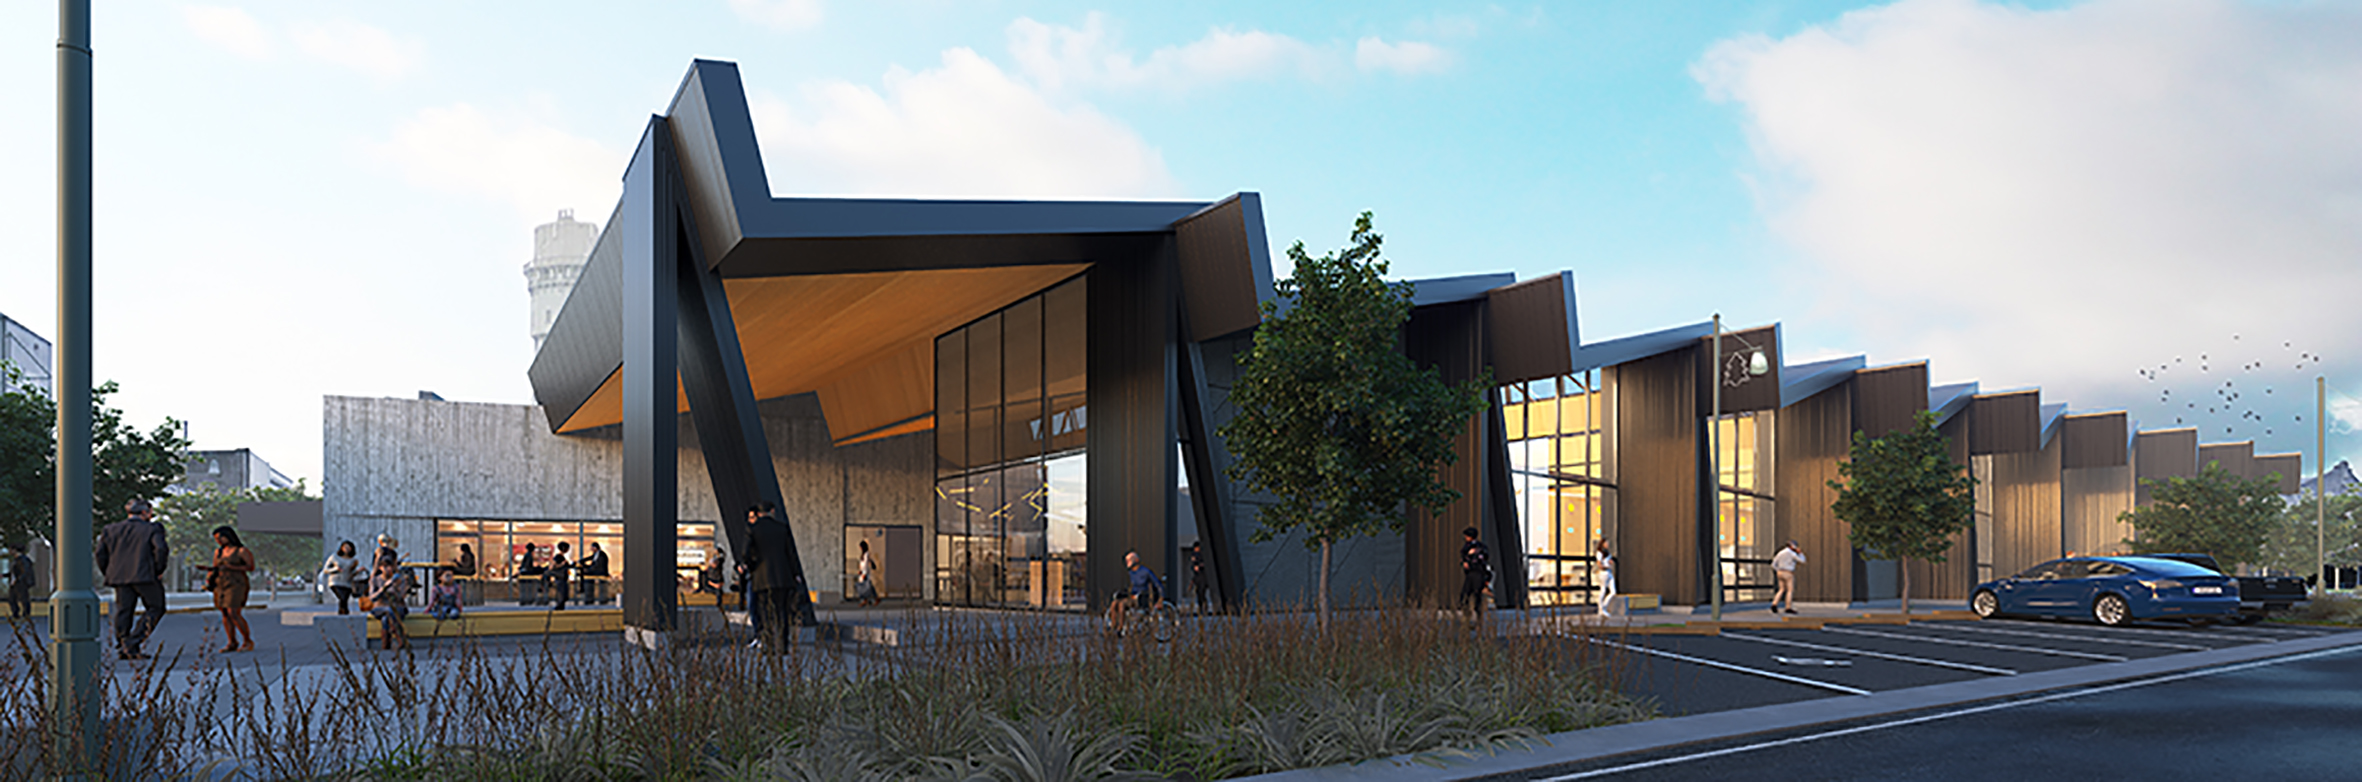 Graphical image of Te Ramanui - the new Library, Culture and Arts Centre